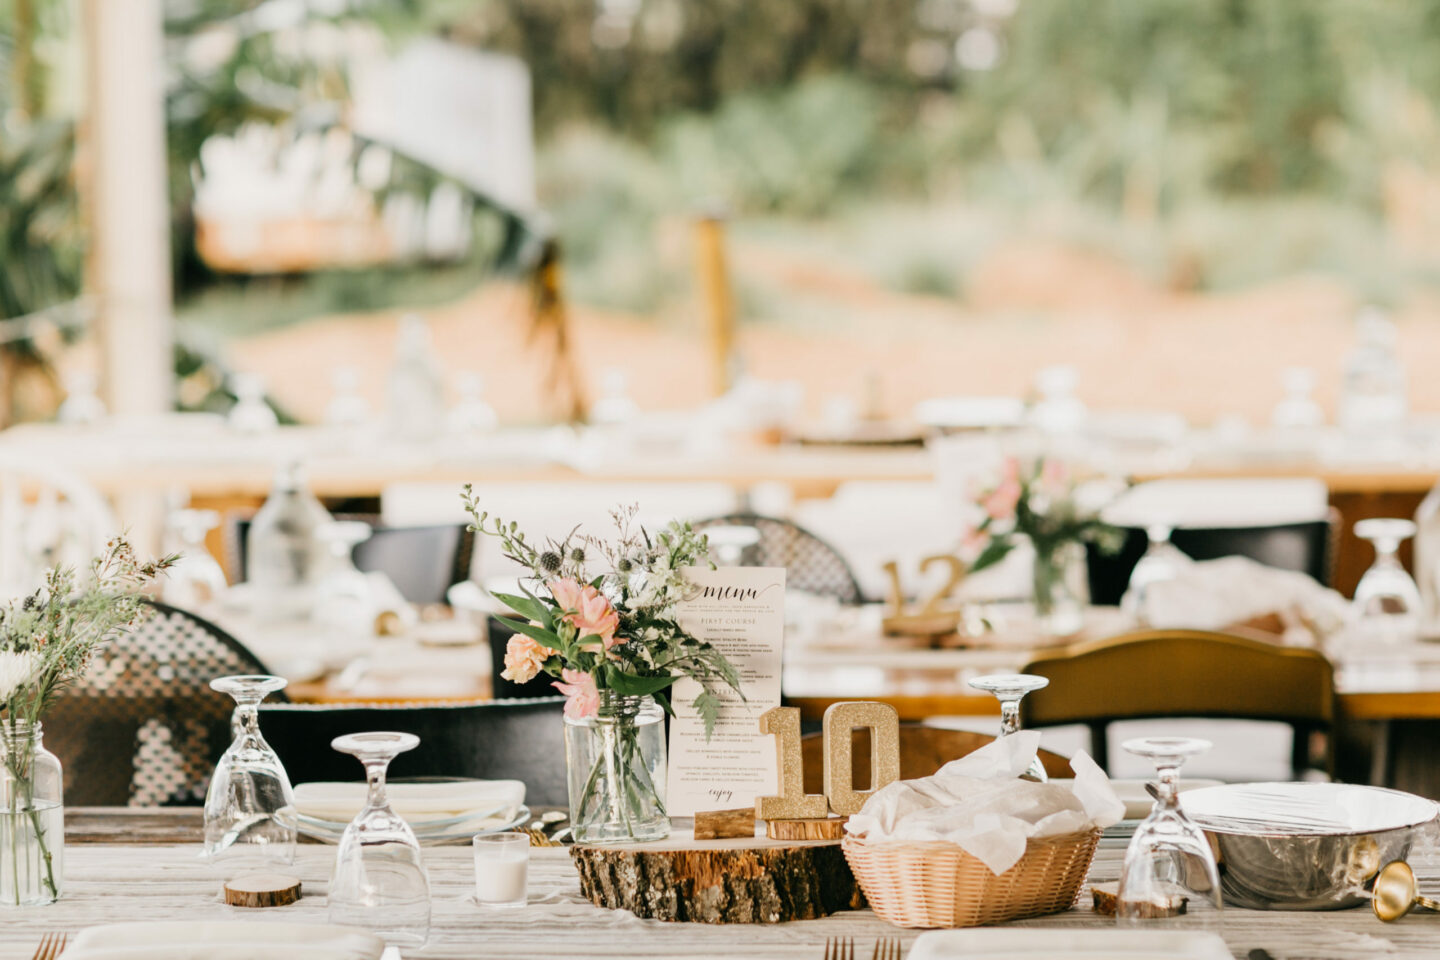 A finely decorated table at an outdoor event